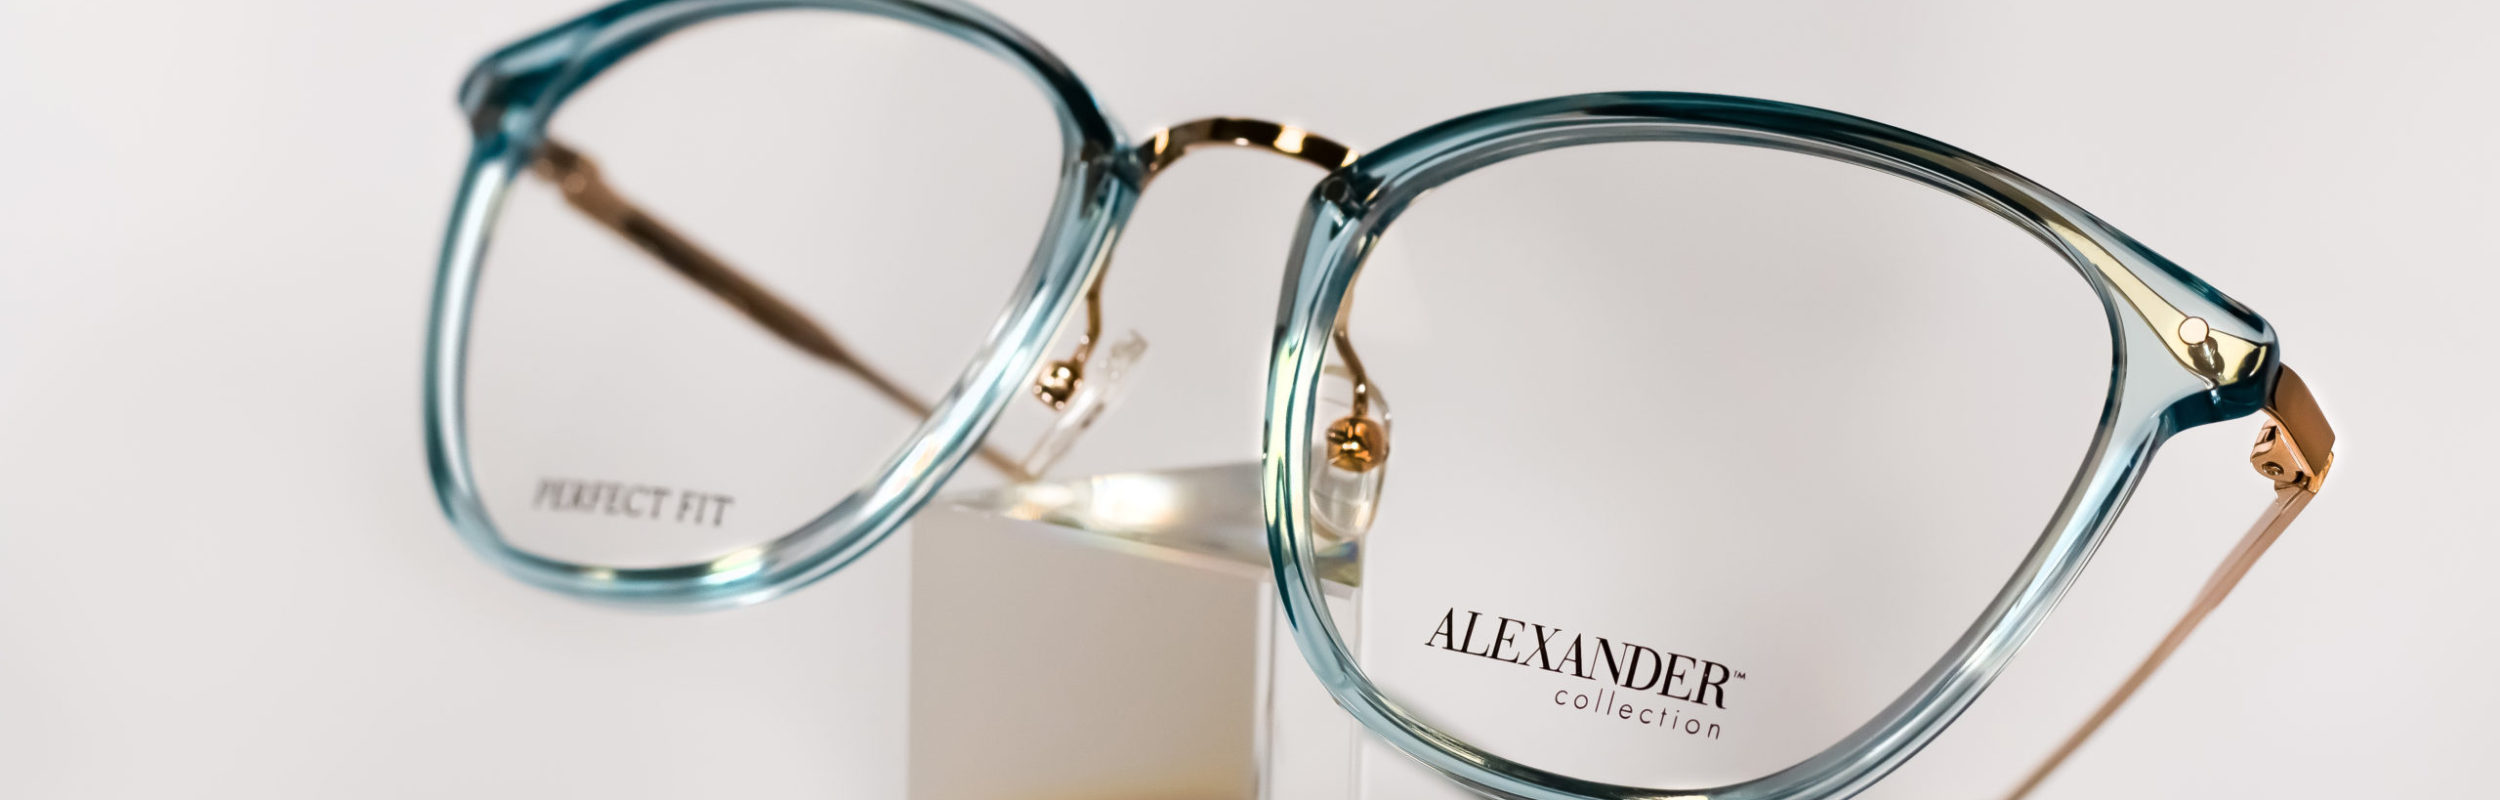 A&A Optical Alexander Collection frames in the style YURI